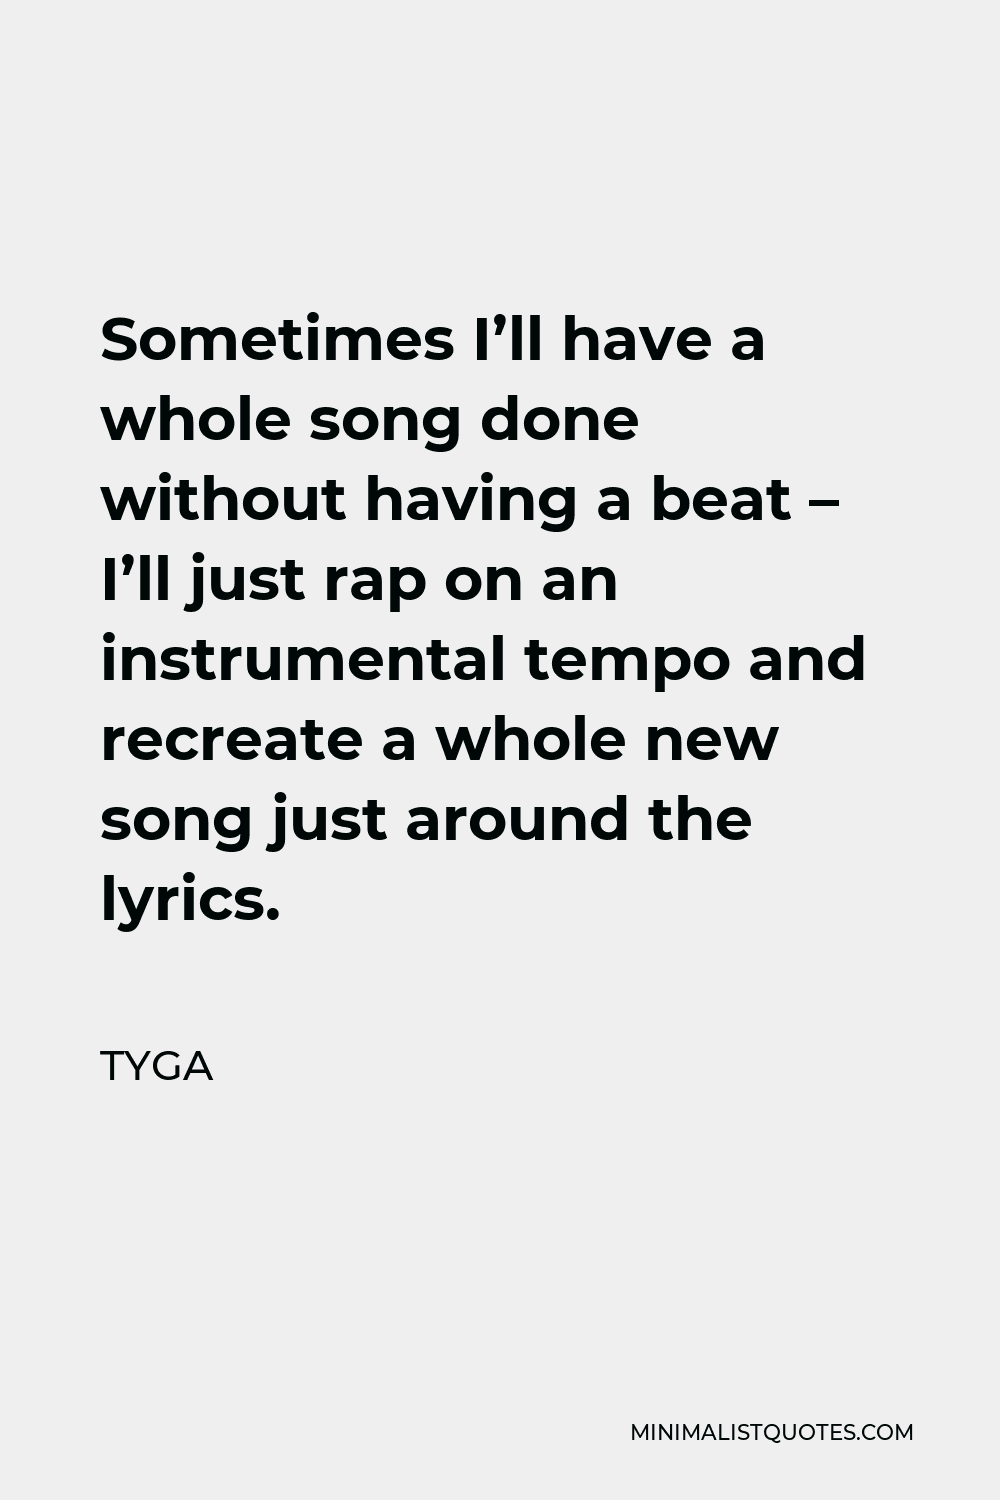 Tyga Quote - Sometimes I’ll have a whole song done without having a beat – I’ll just rap on an instrumental tempo and recreate a whole new song just around the lyrics.